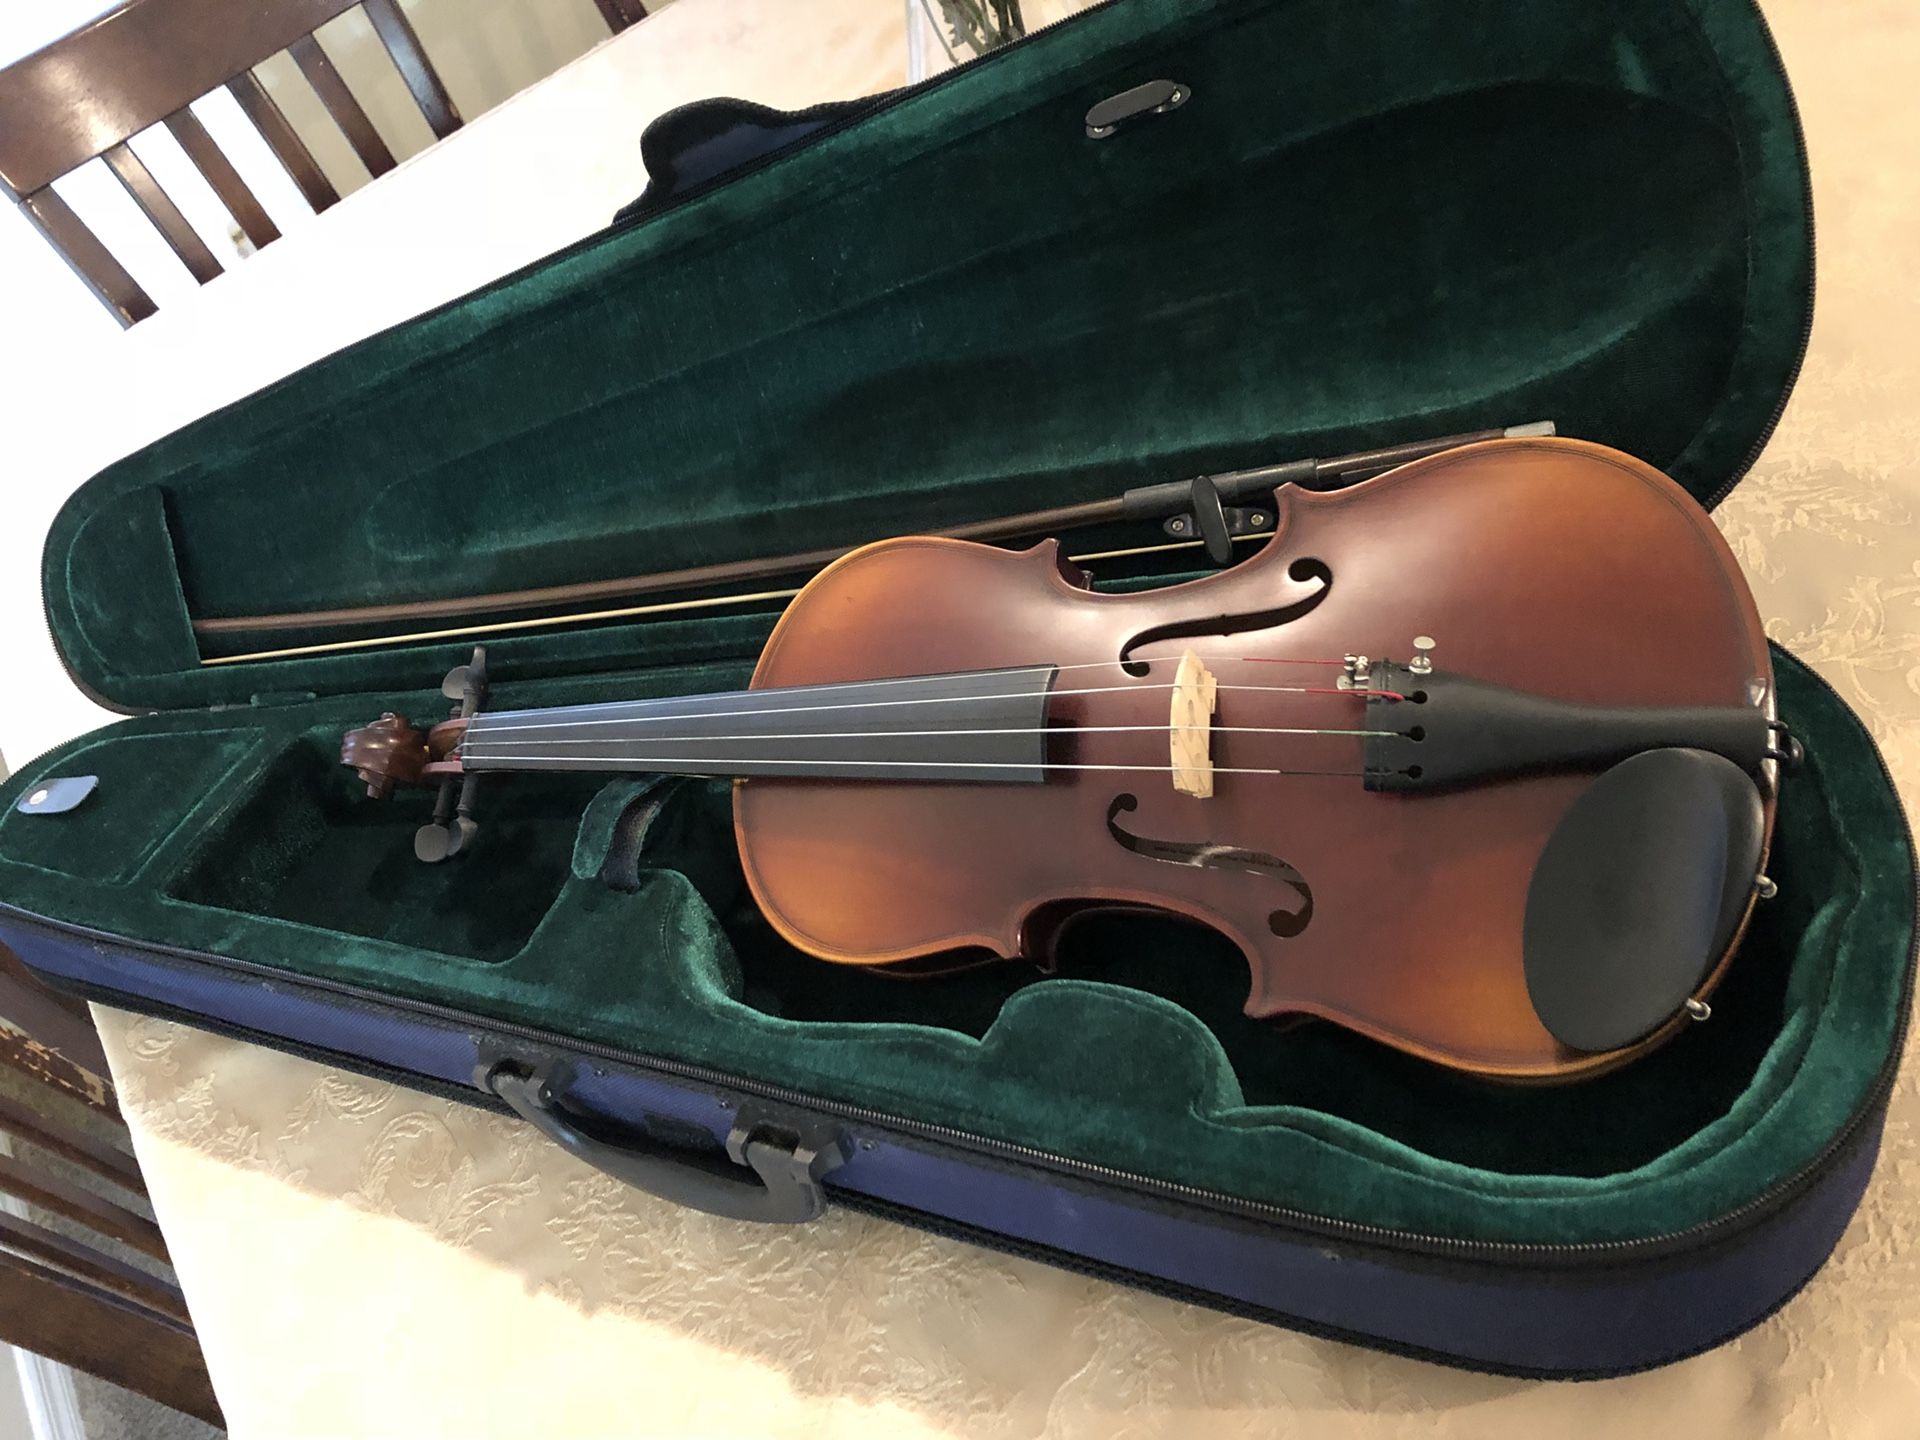 Pearl river violin 3/4 with hard shell